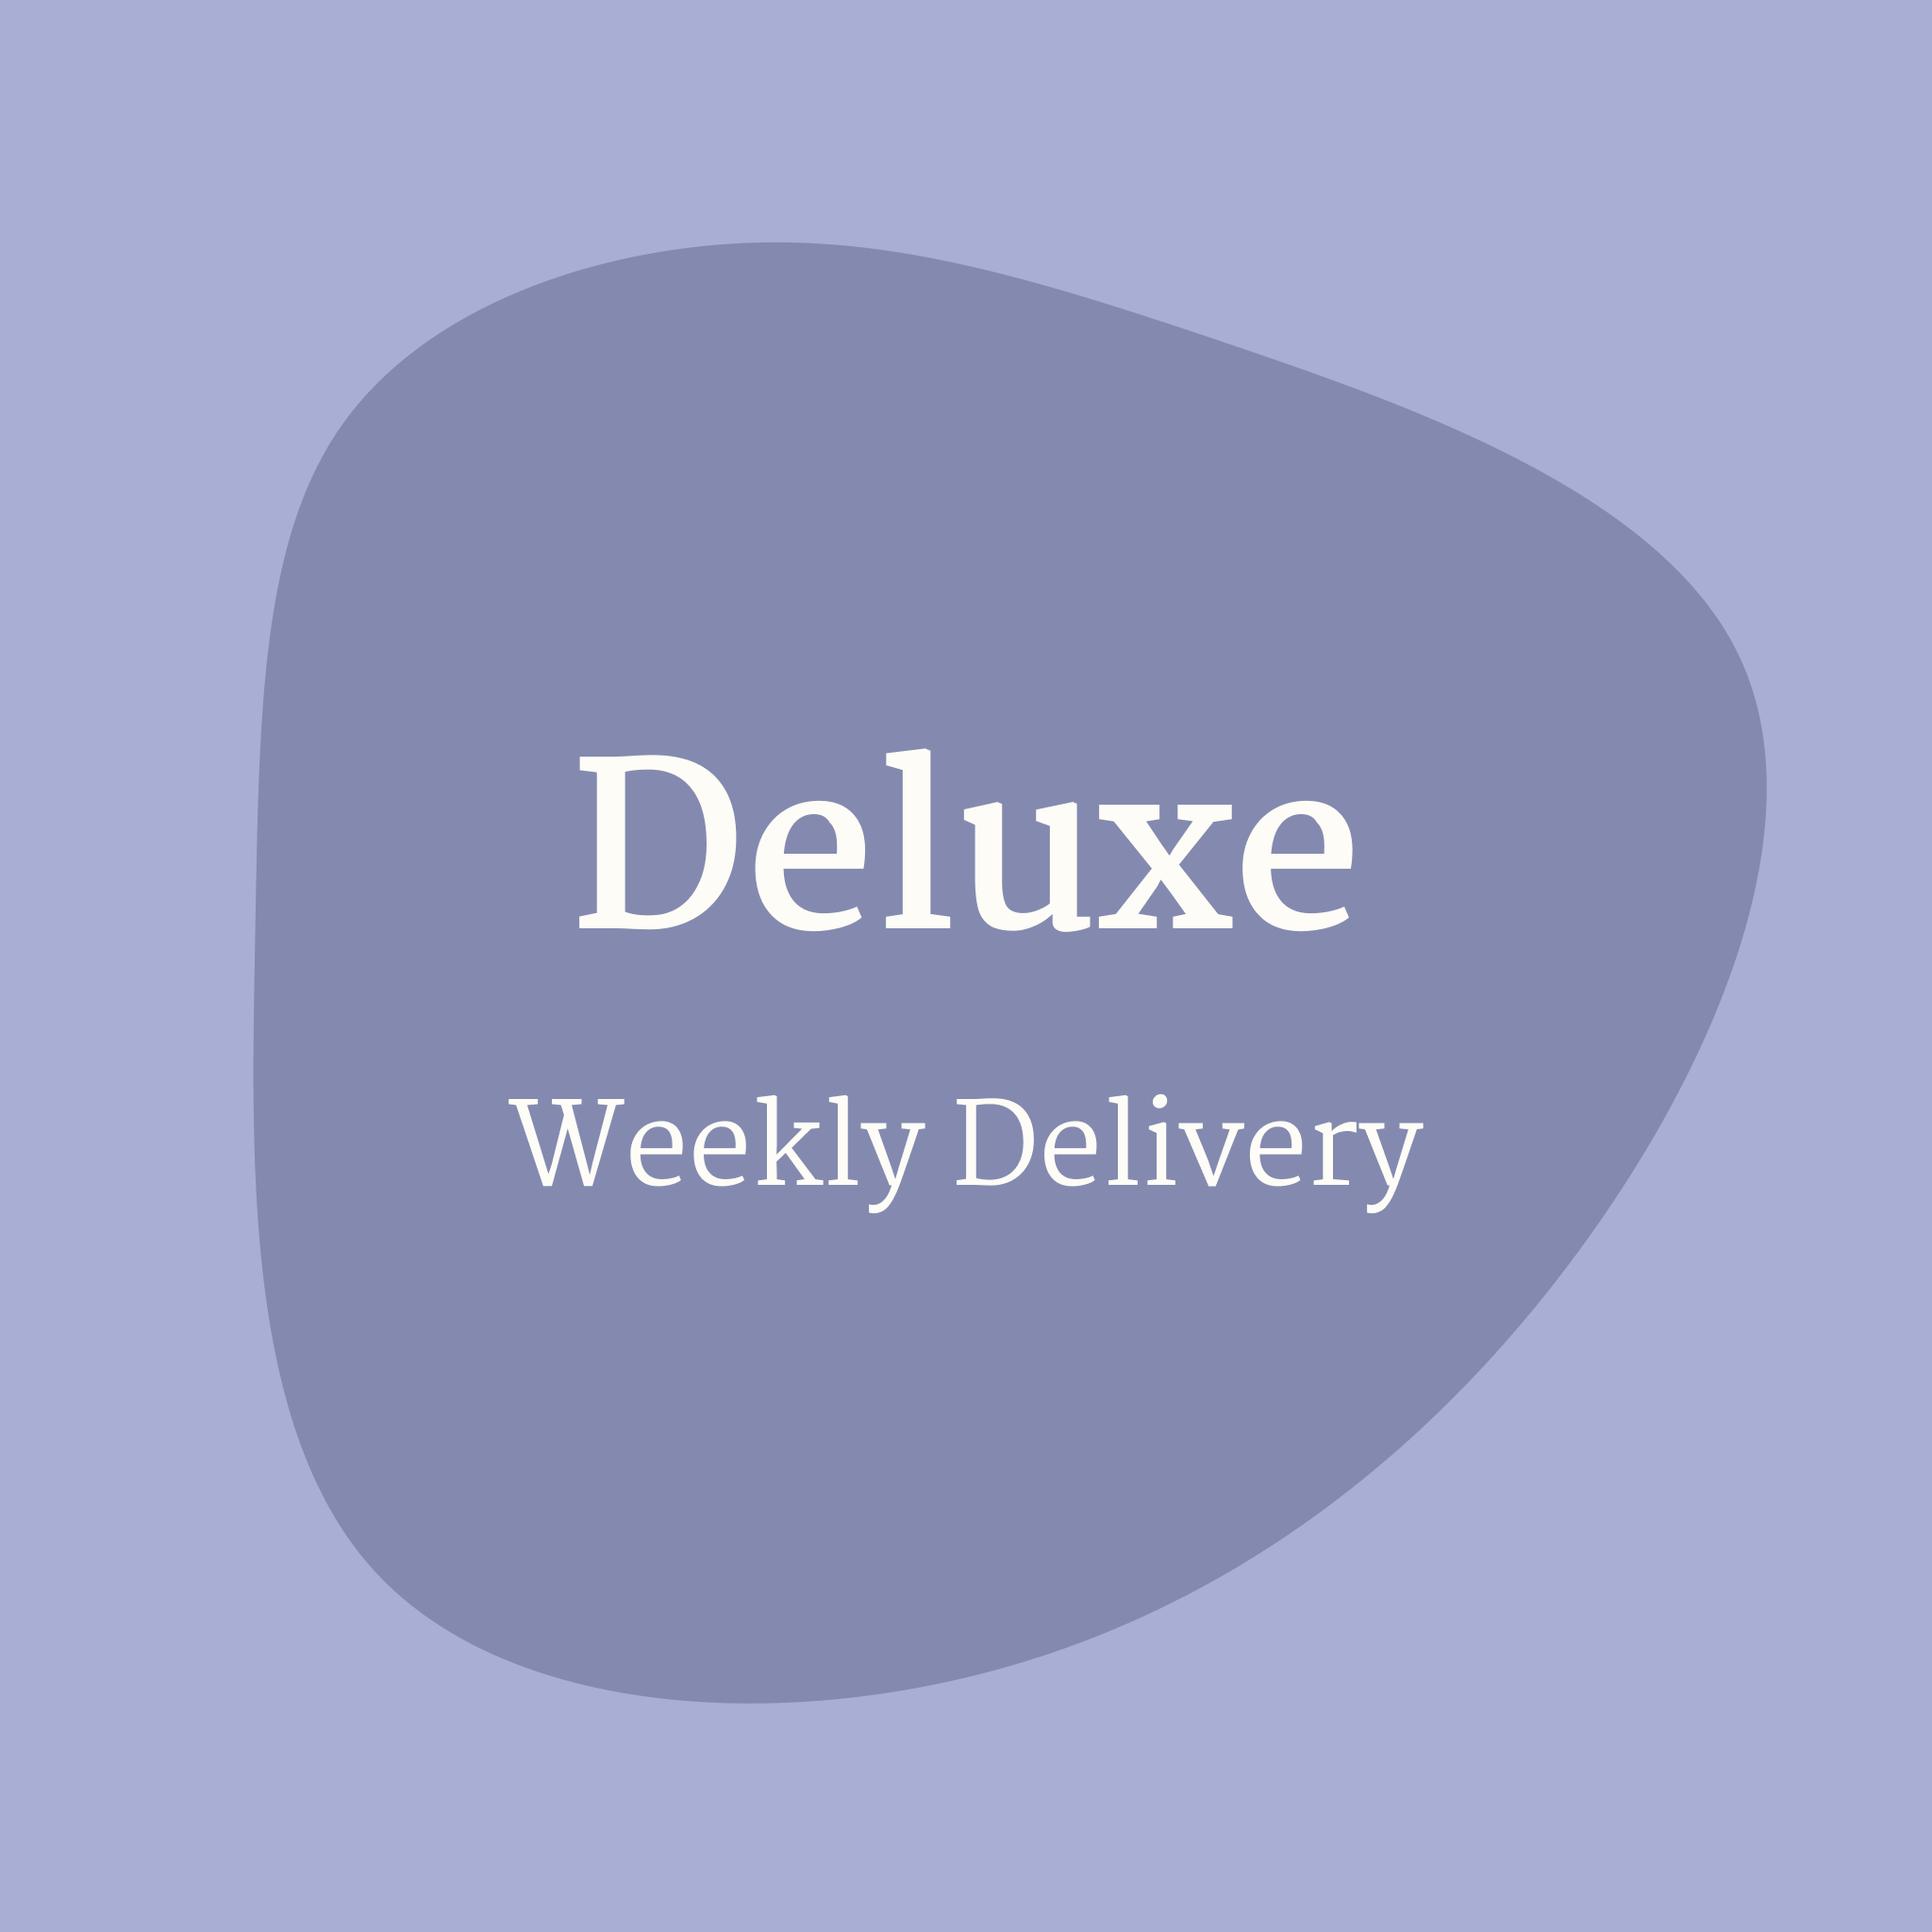 Deluxe Weekly Delivery